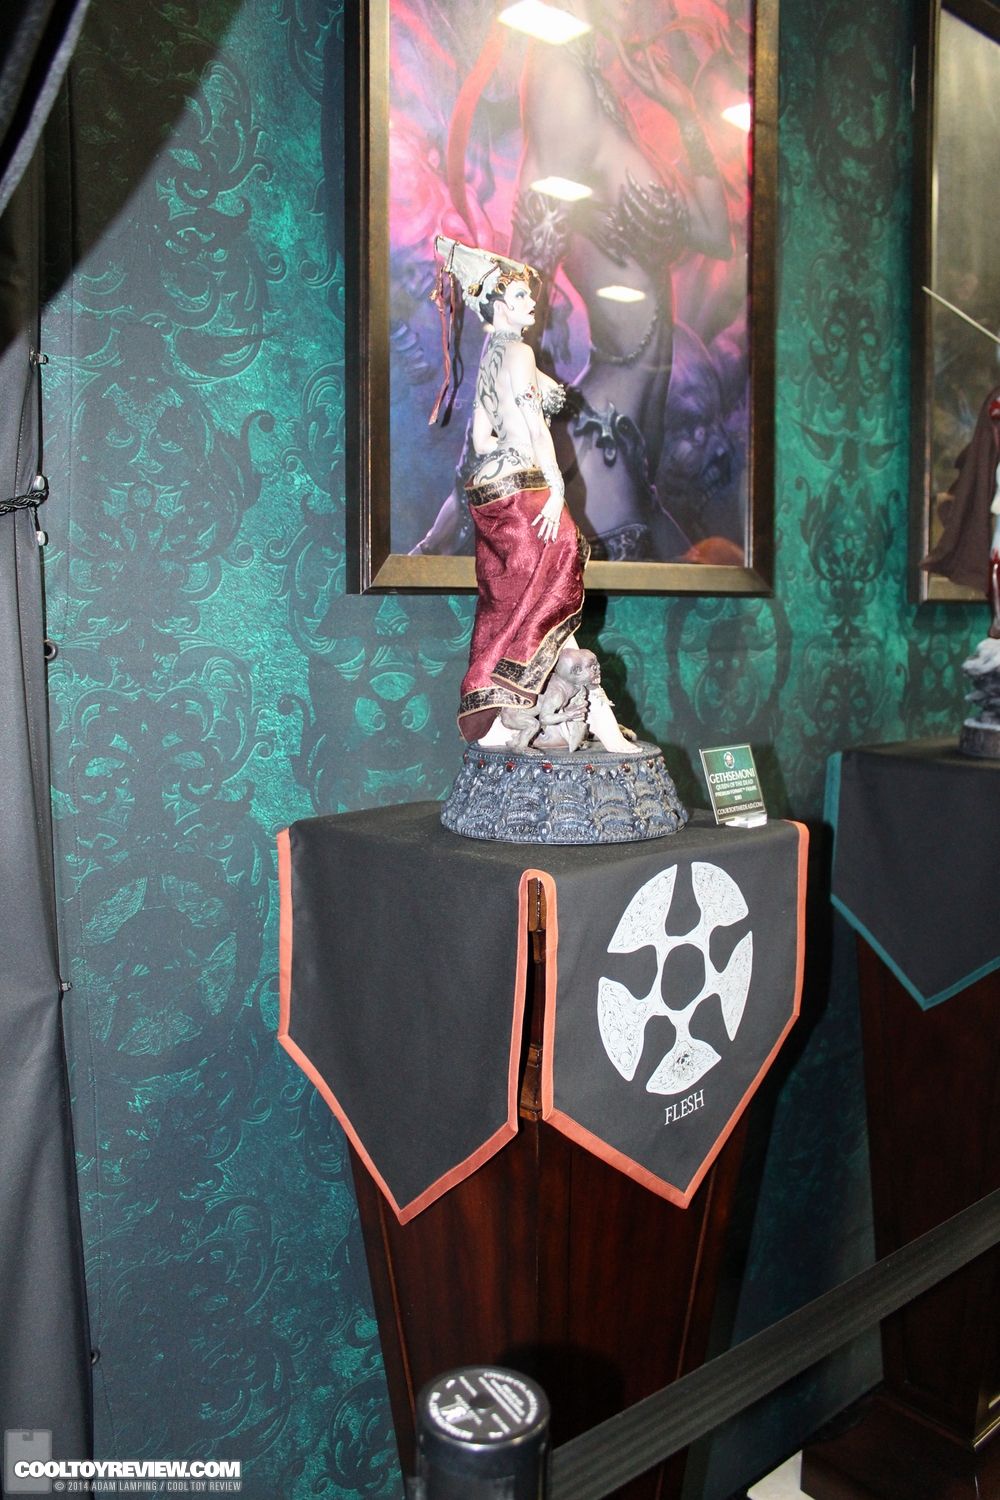 san-diego-comic-con-2014-sideshow-collectibles-court-of-the-dead-021.JPG